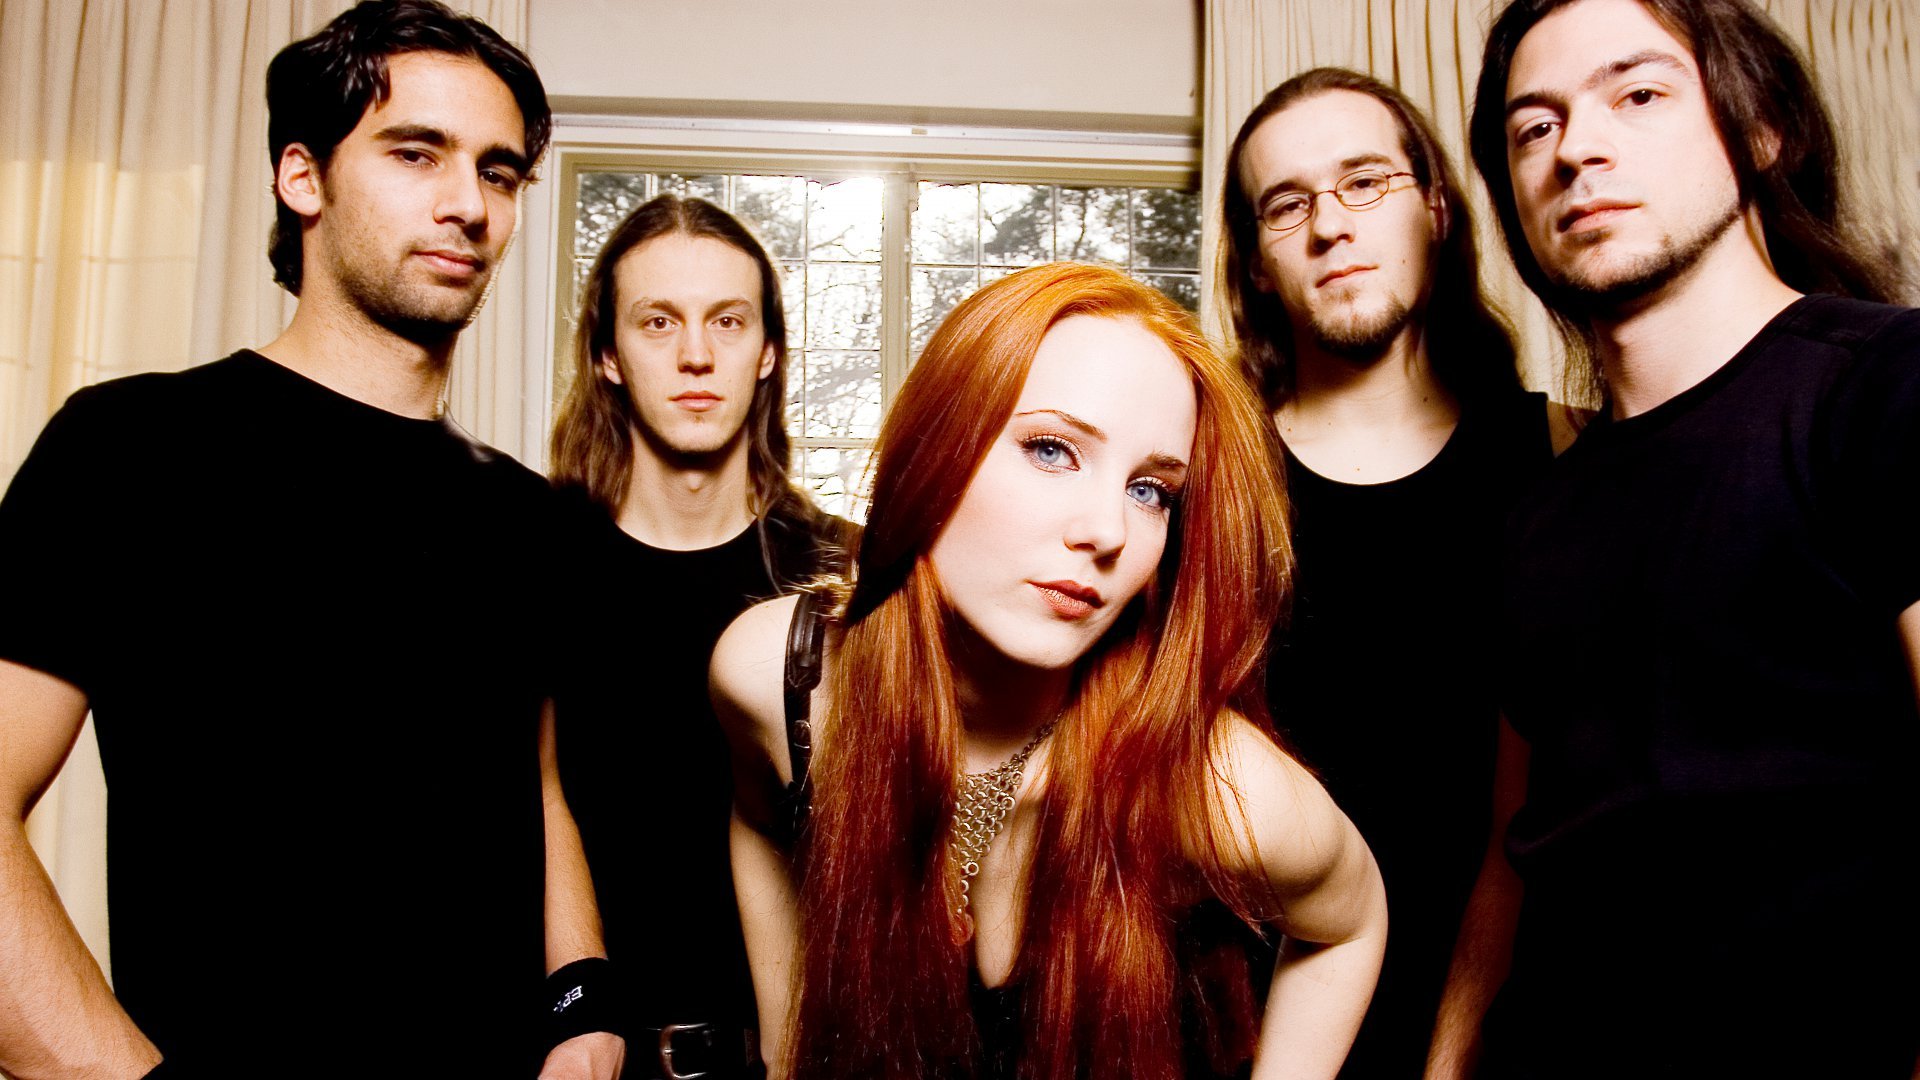 Epica HD Wallpaper | Background Image | 1920x1080 | ID ...